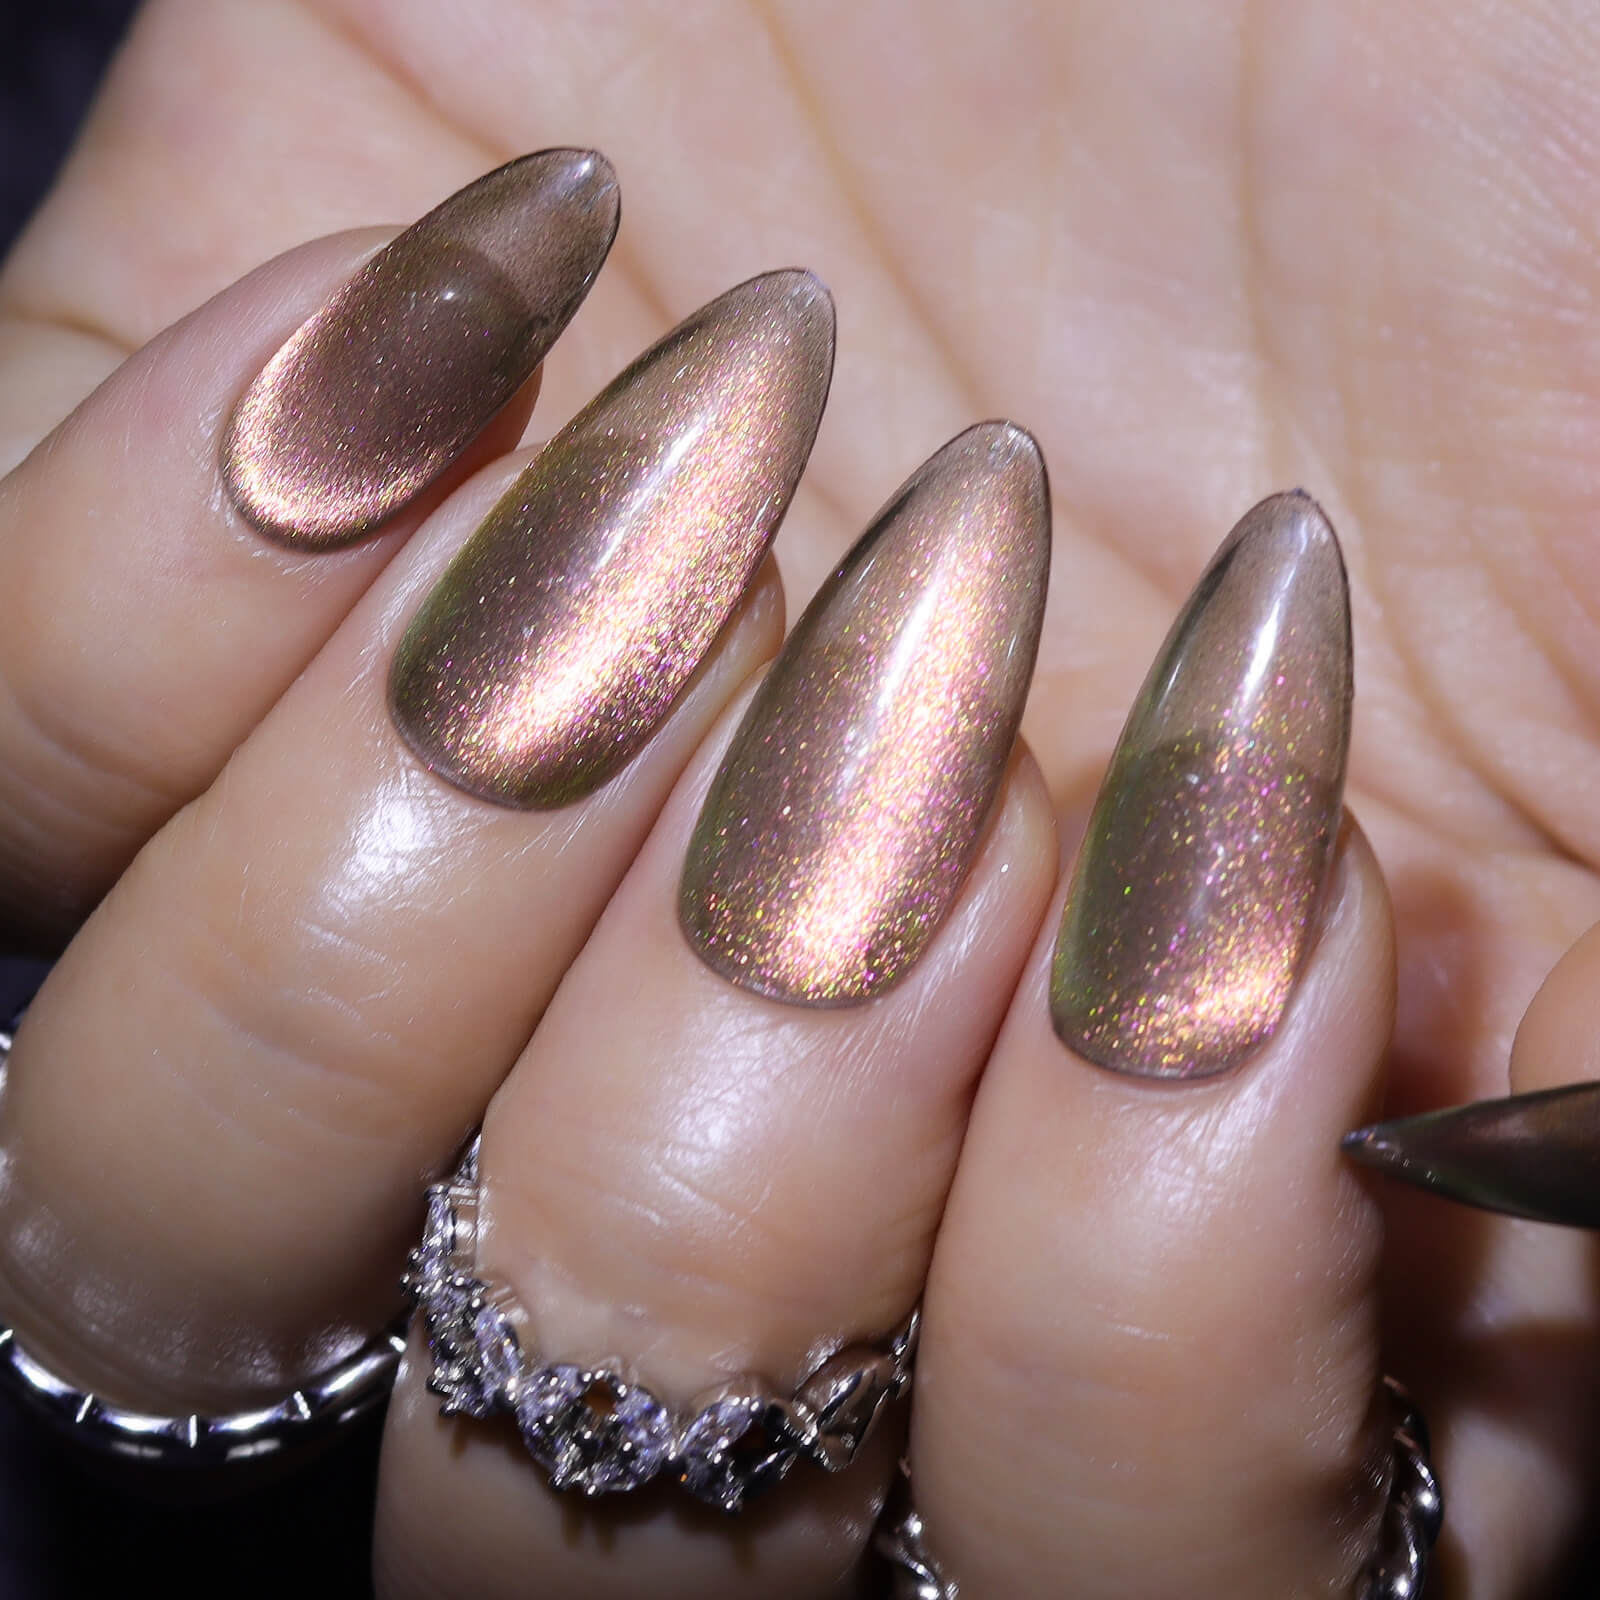 Gels vs acrylics – which one wins? | Nail Polish Direct